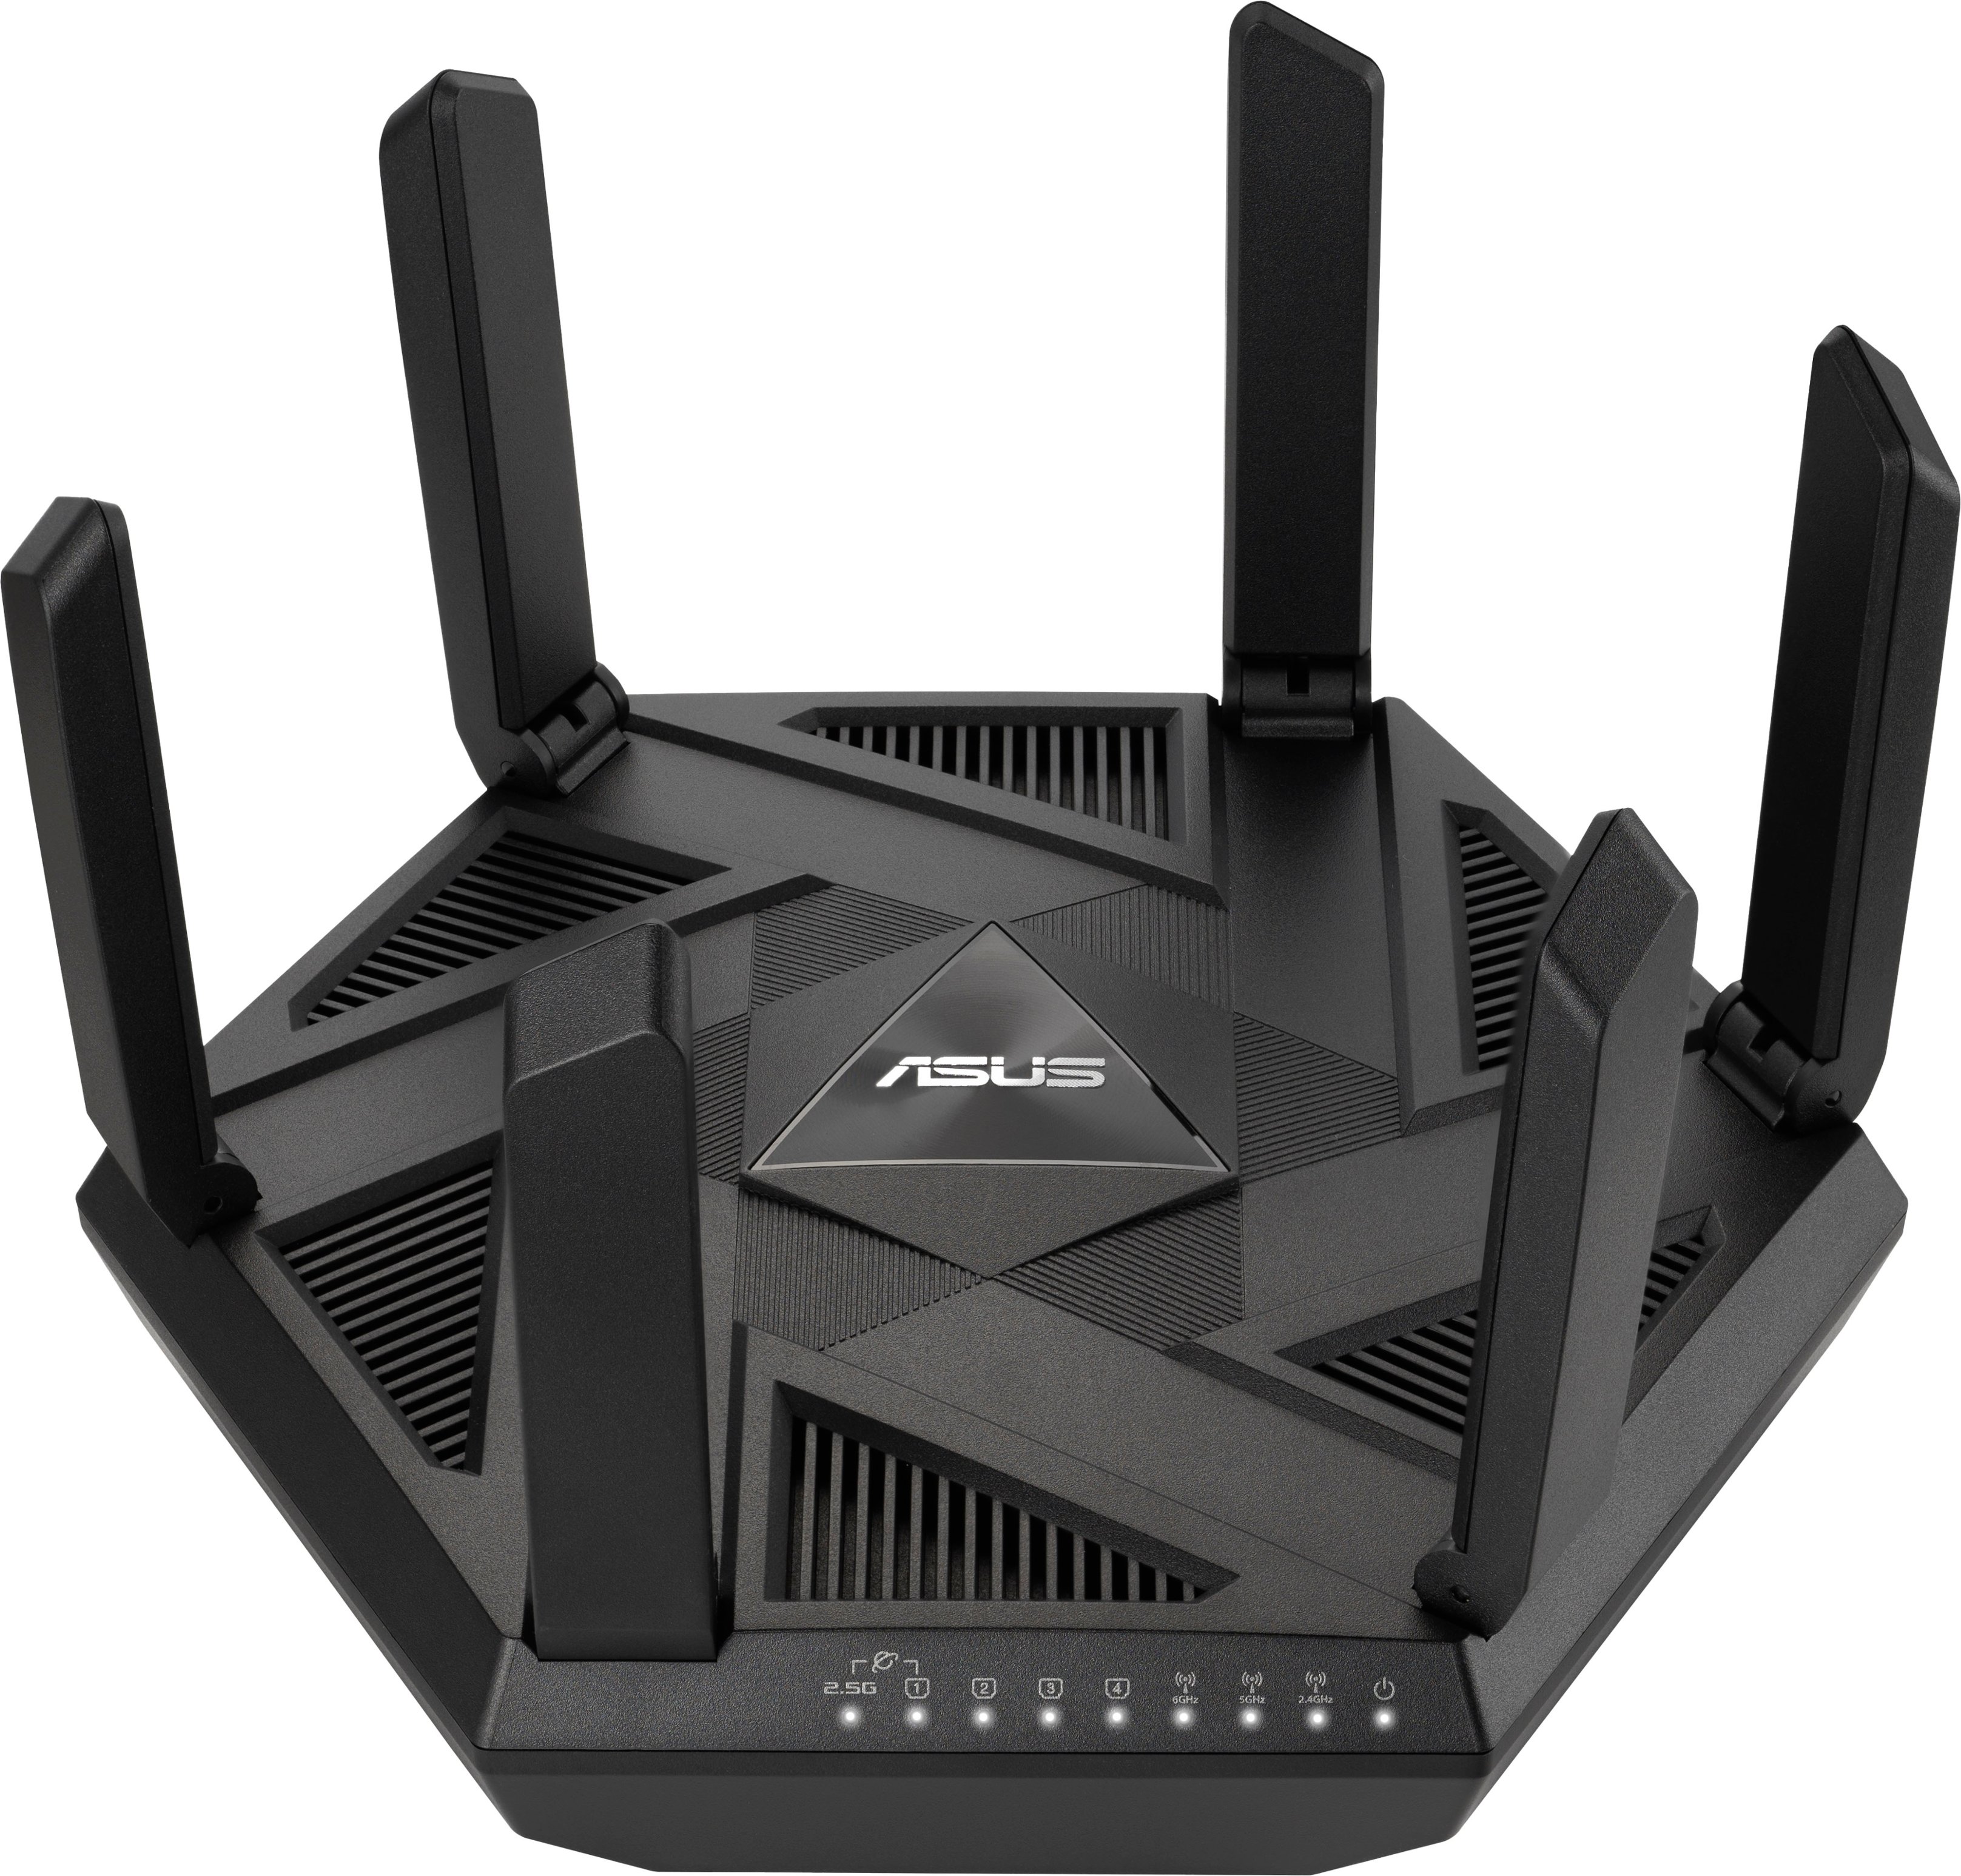 ASUS RT AXE7800 Tri-Band Wi-Fi Router Black RT-AXE7800 - Best Buy